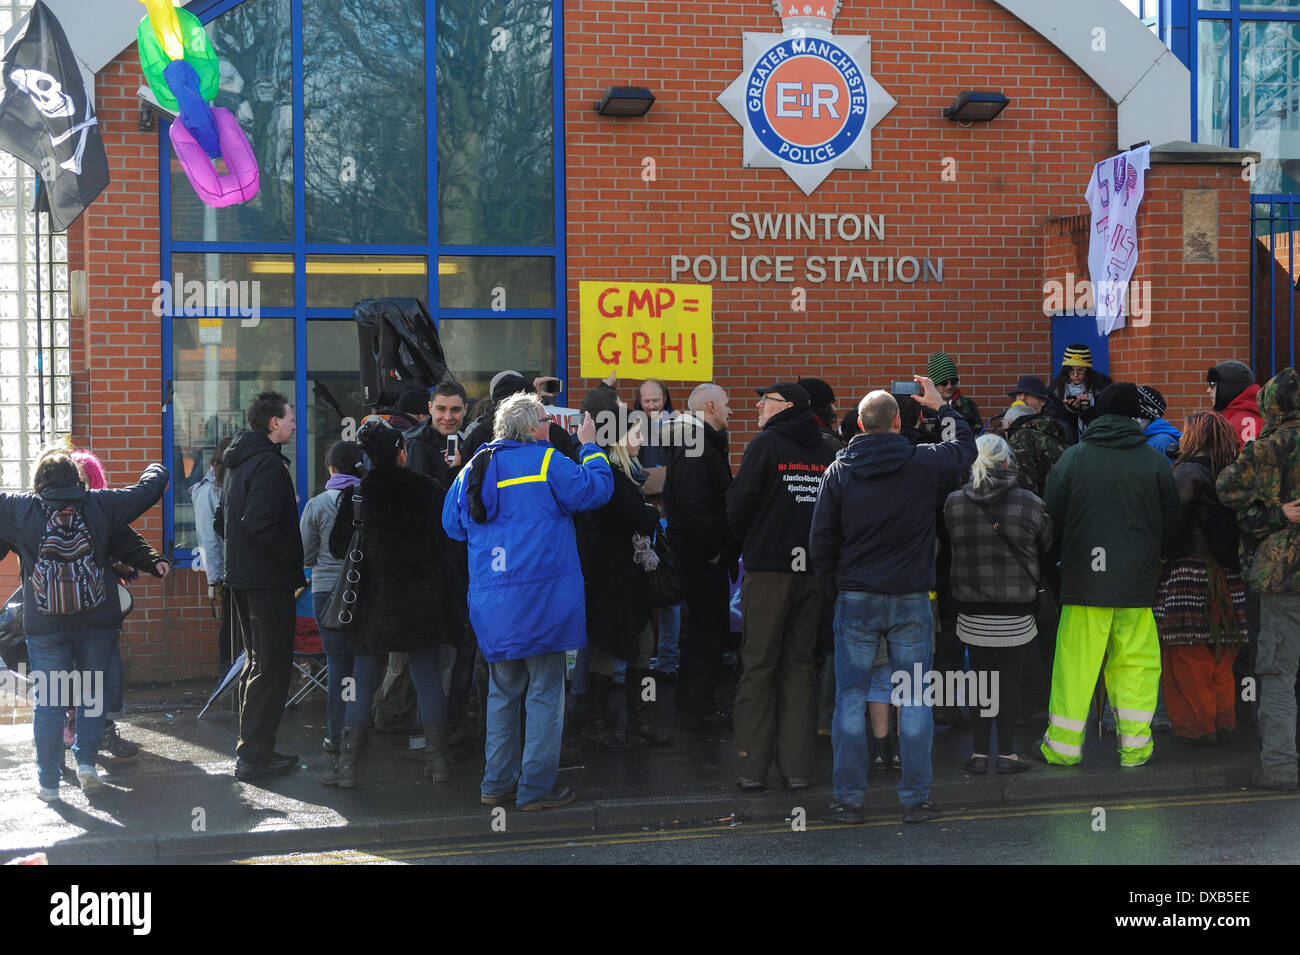 Swinton, Salford, Manchester, UK . 22nd March 2014. Anti-fracking campaigners protest outside Swinton police station, Salford, Manchester. Anti-fracking protesters gather in front of Swinton police station, one holding up a sign suggesting that the Greater Manchester Police are guilty of Grievious Bodily Harm. Credit:  Dave Ellison/Alamy Live News Stock Photo